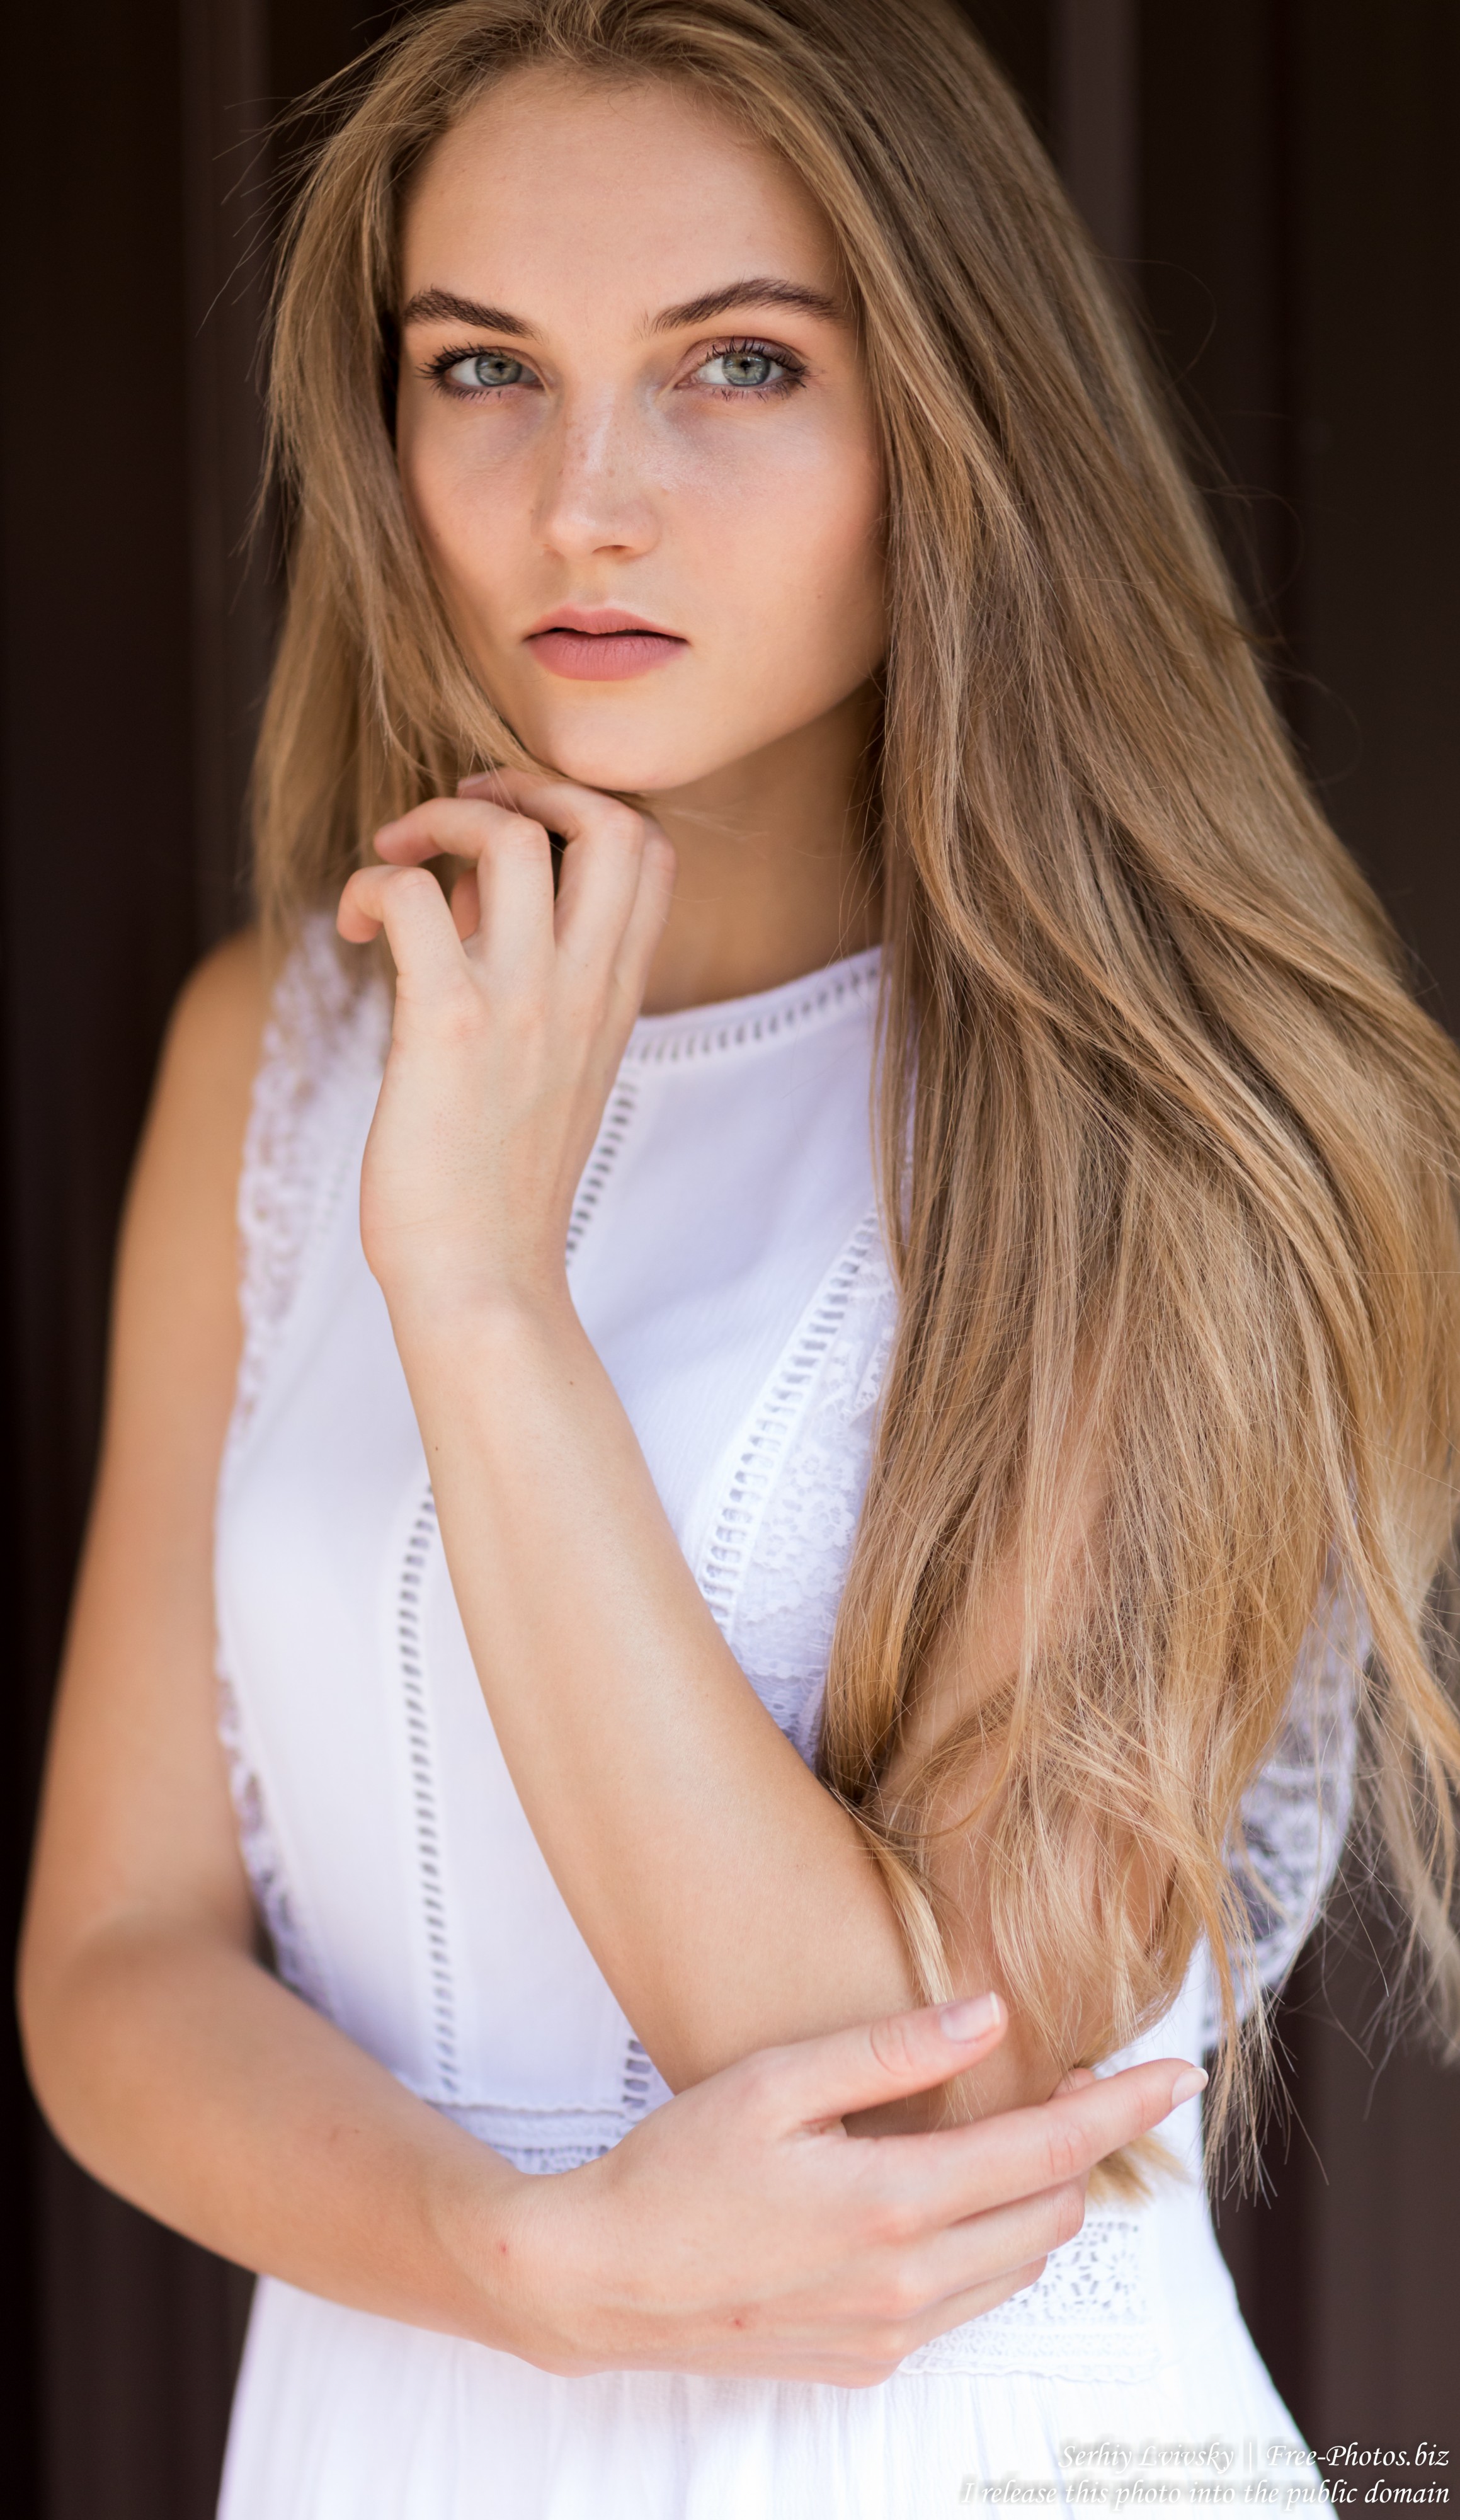 Yaryna - a 21-year-old natural blonde Catholic girl photographed in August 2019 by Serhiy Lvivsky, picture 25